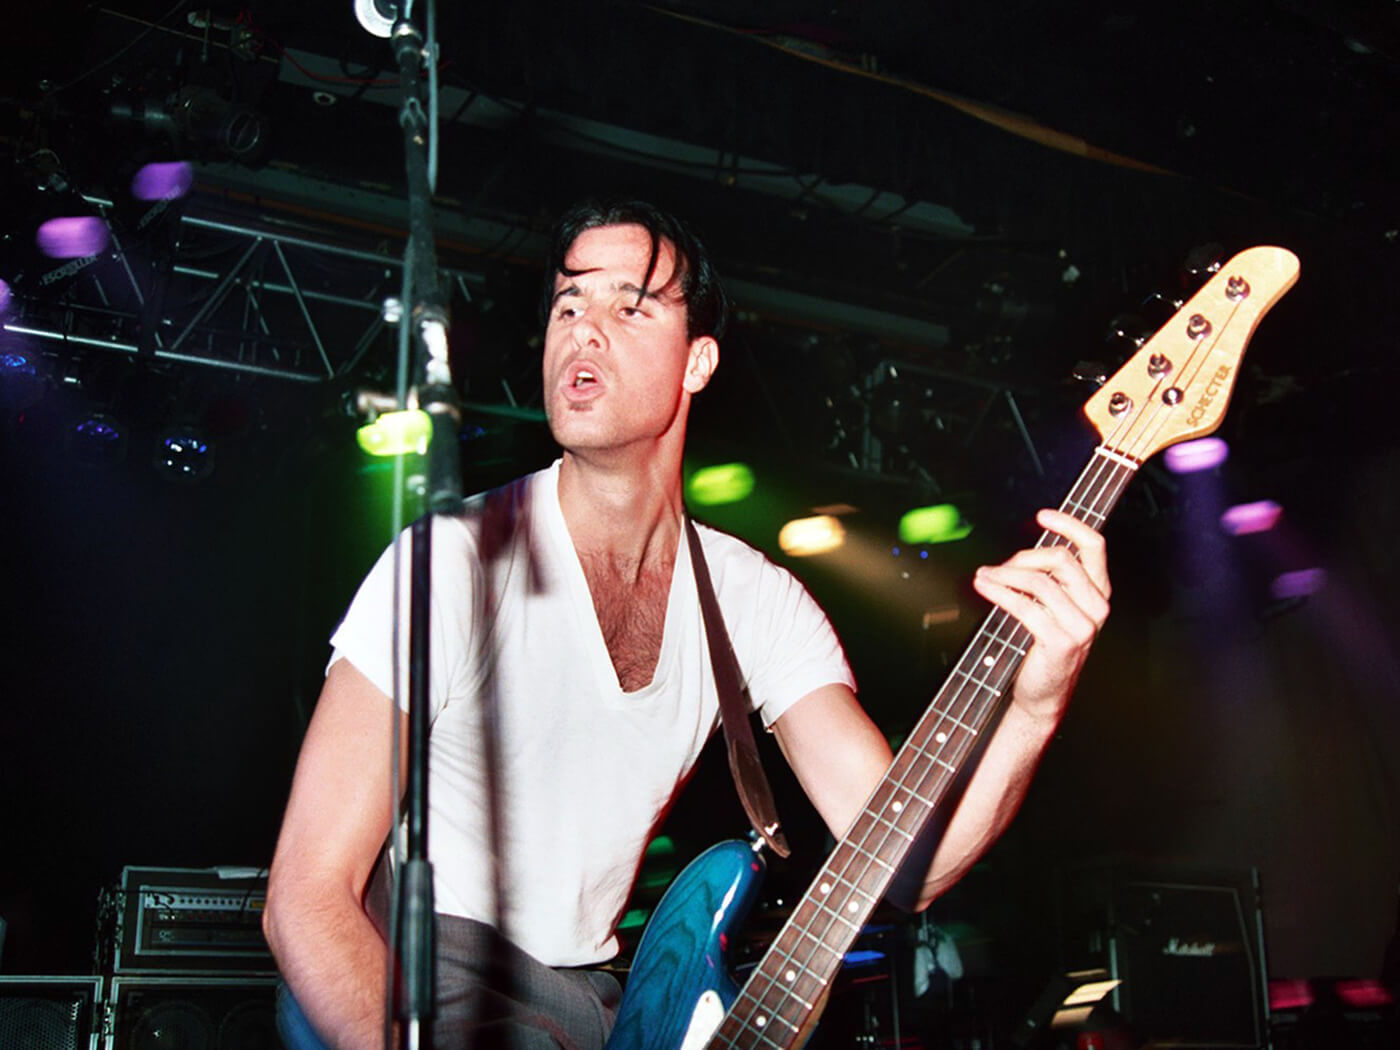 Robert DeLeo of Stone Temple Pilots playing his Schecter bass in 1993 by Jeff Kravitz/FilmMagic, Inc via Getty Images